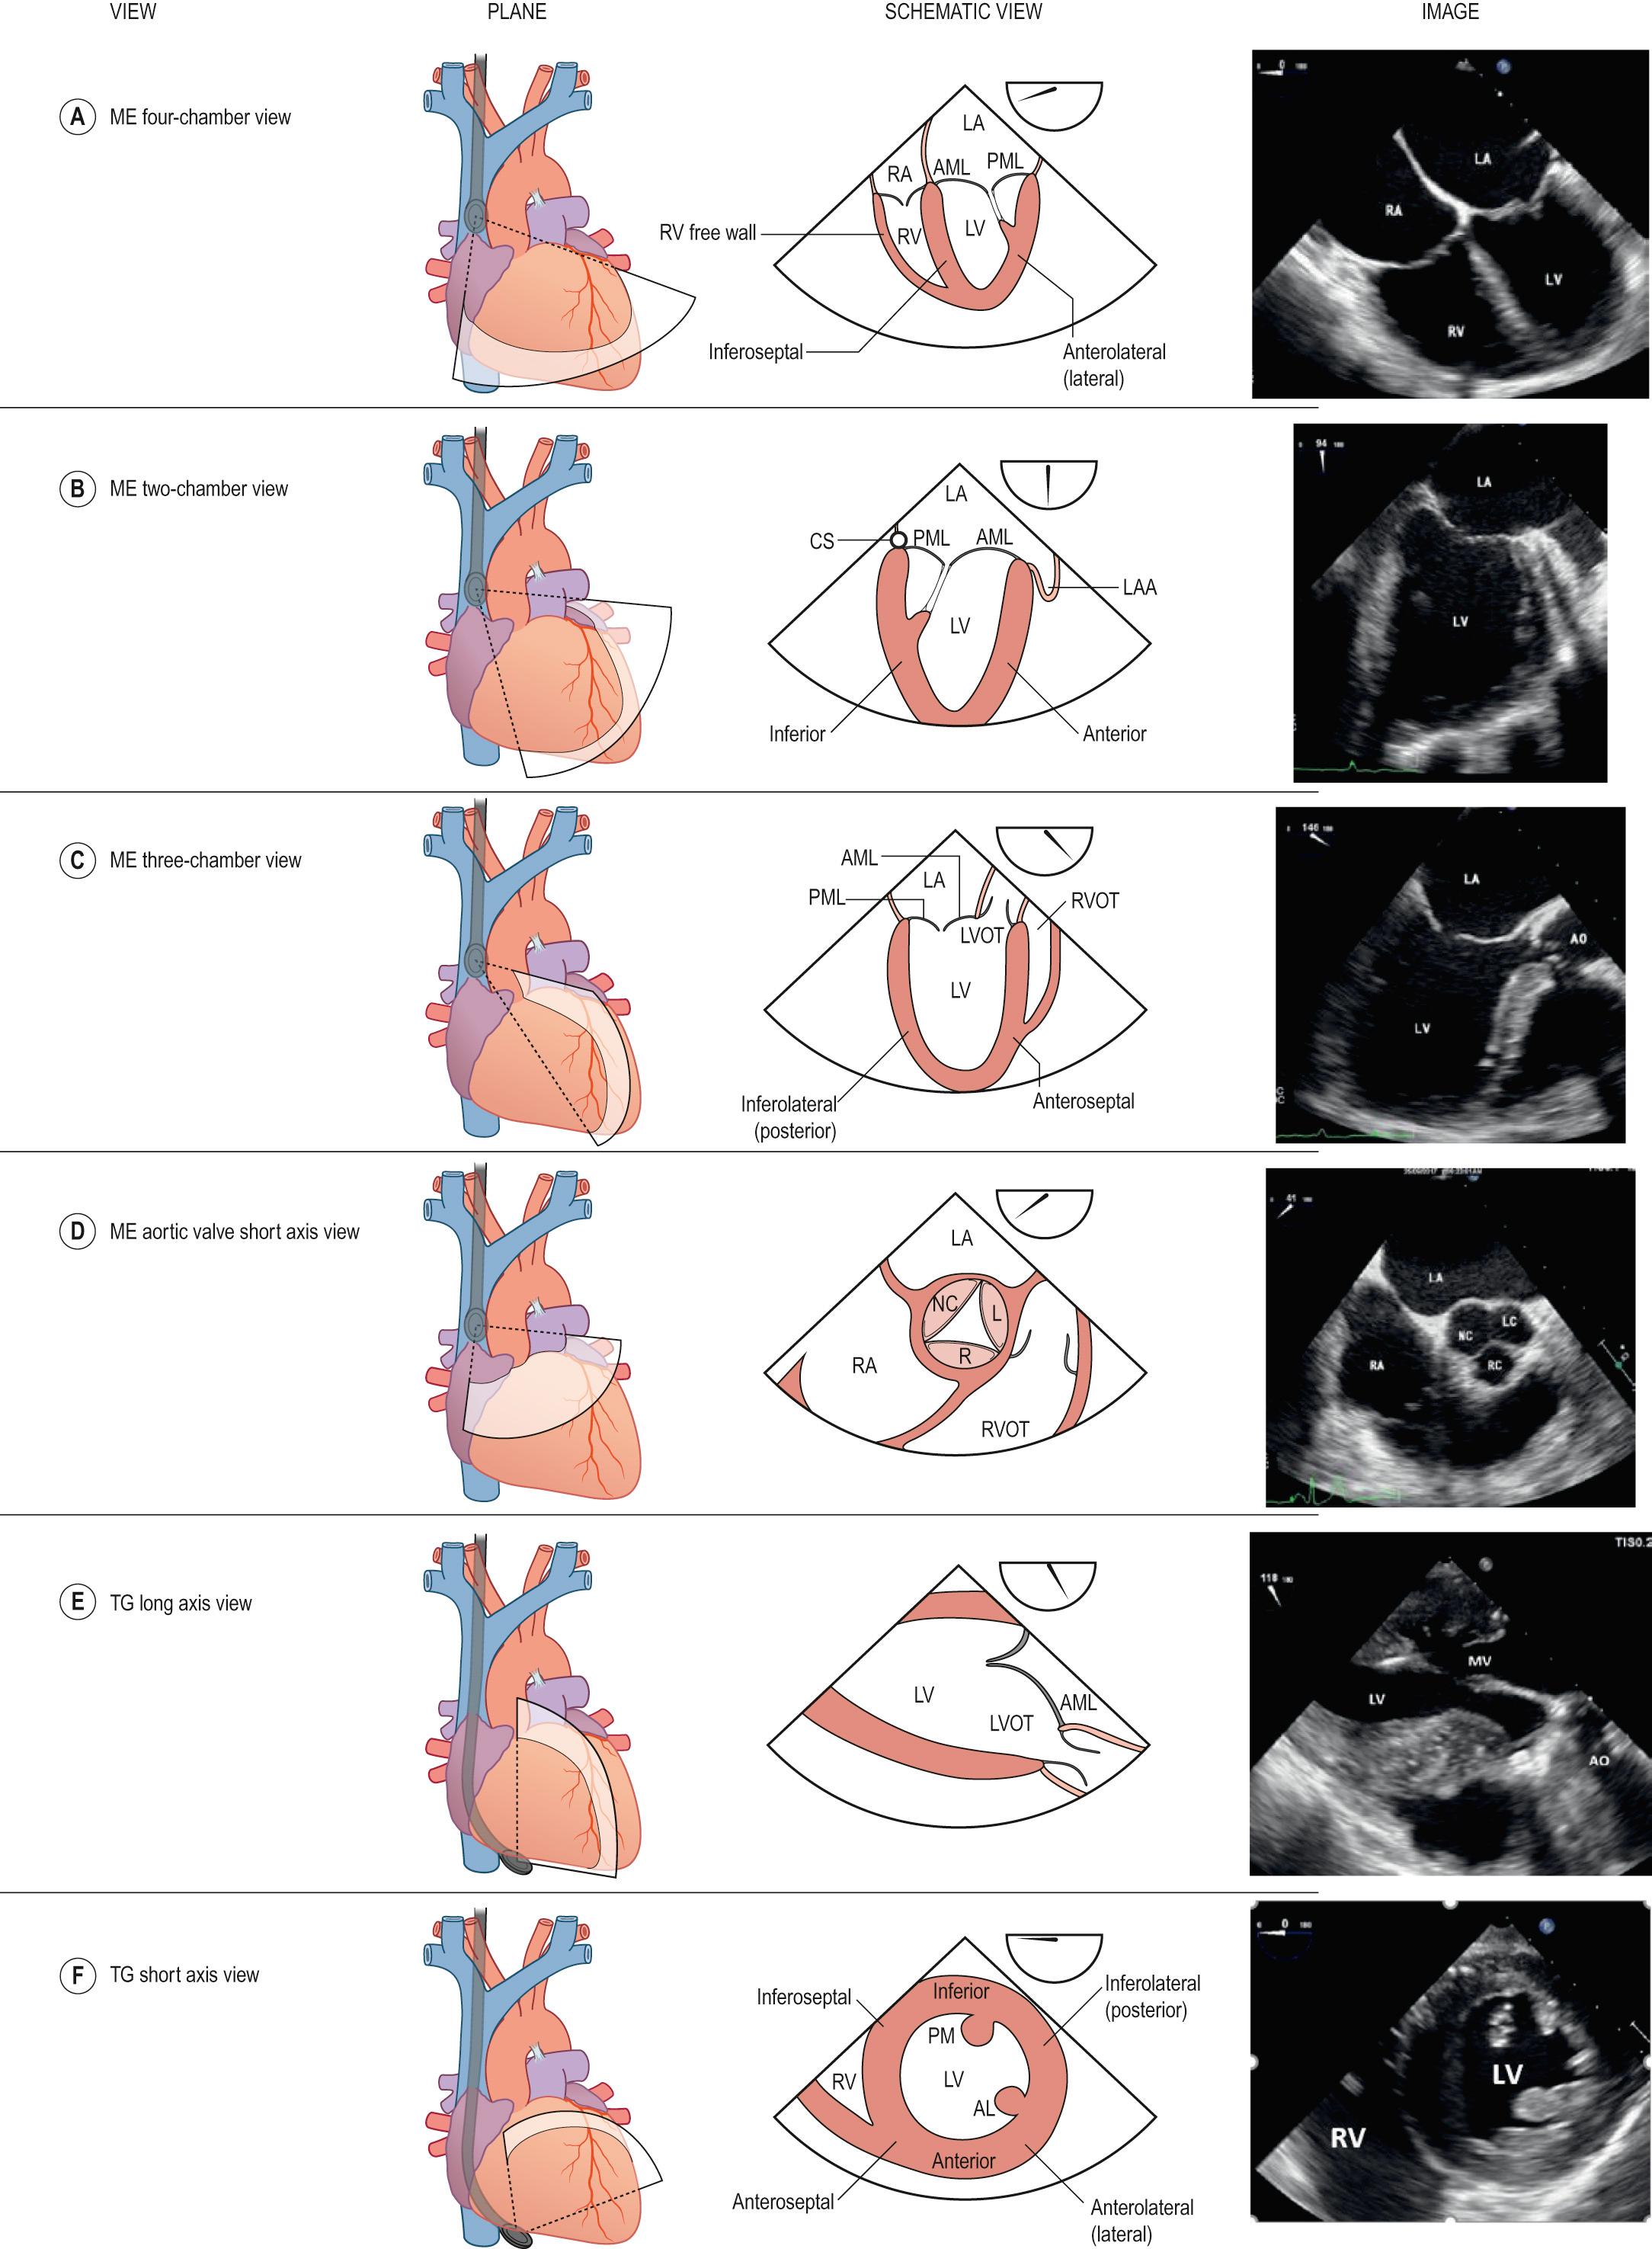 Fig. 50.2, Principal transoesophageal views. Abbreviations: AL, anterolateral papillary muscle; AML, anterior mitral leaflet; AO, aorta; CS, coronary sinus; L, left coronary cusp; LA, left atrium; LAA, left atrial appendage; LV, left ventricle; LVOT, left ventricular outflow; ME, mid-oesophageal; NC, non-coronary cusp; PM, posteromedial papillary muscle; PML, posterior mitral leaflet; R, right coronary cusp; RA, right atrium; RV, right ventricle; RVOT, right ventricular outflow; TG, transgastric.